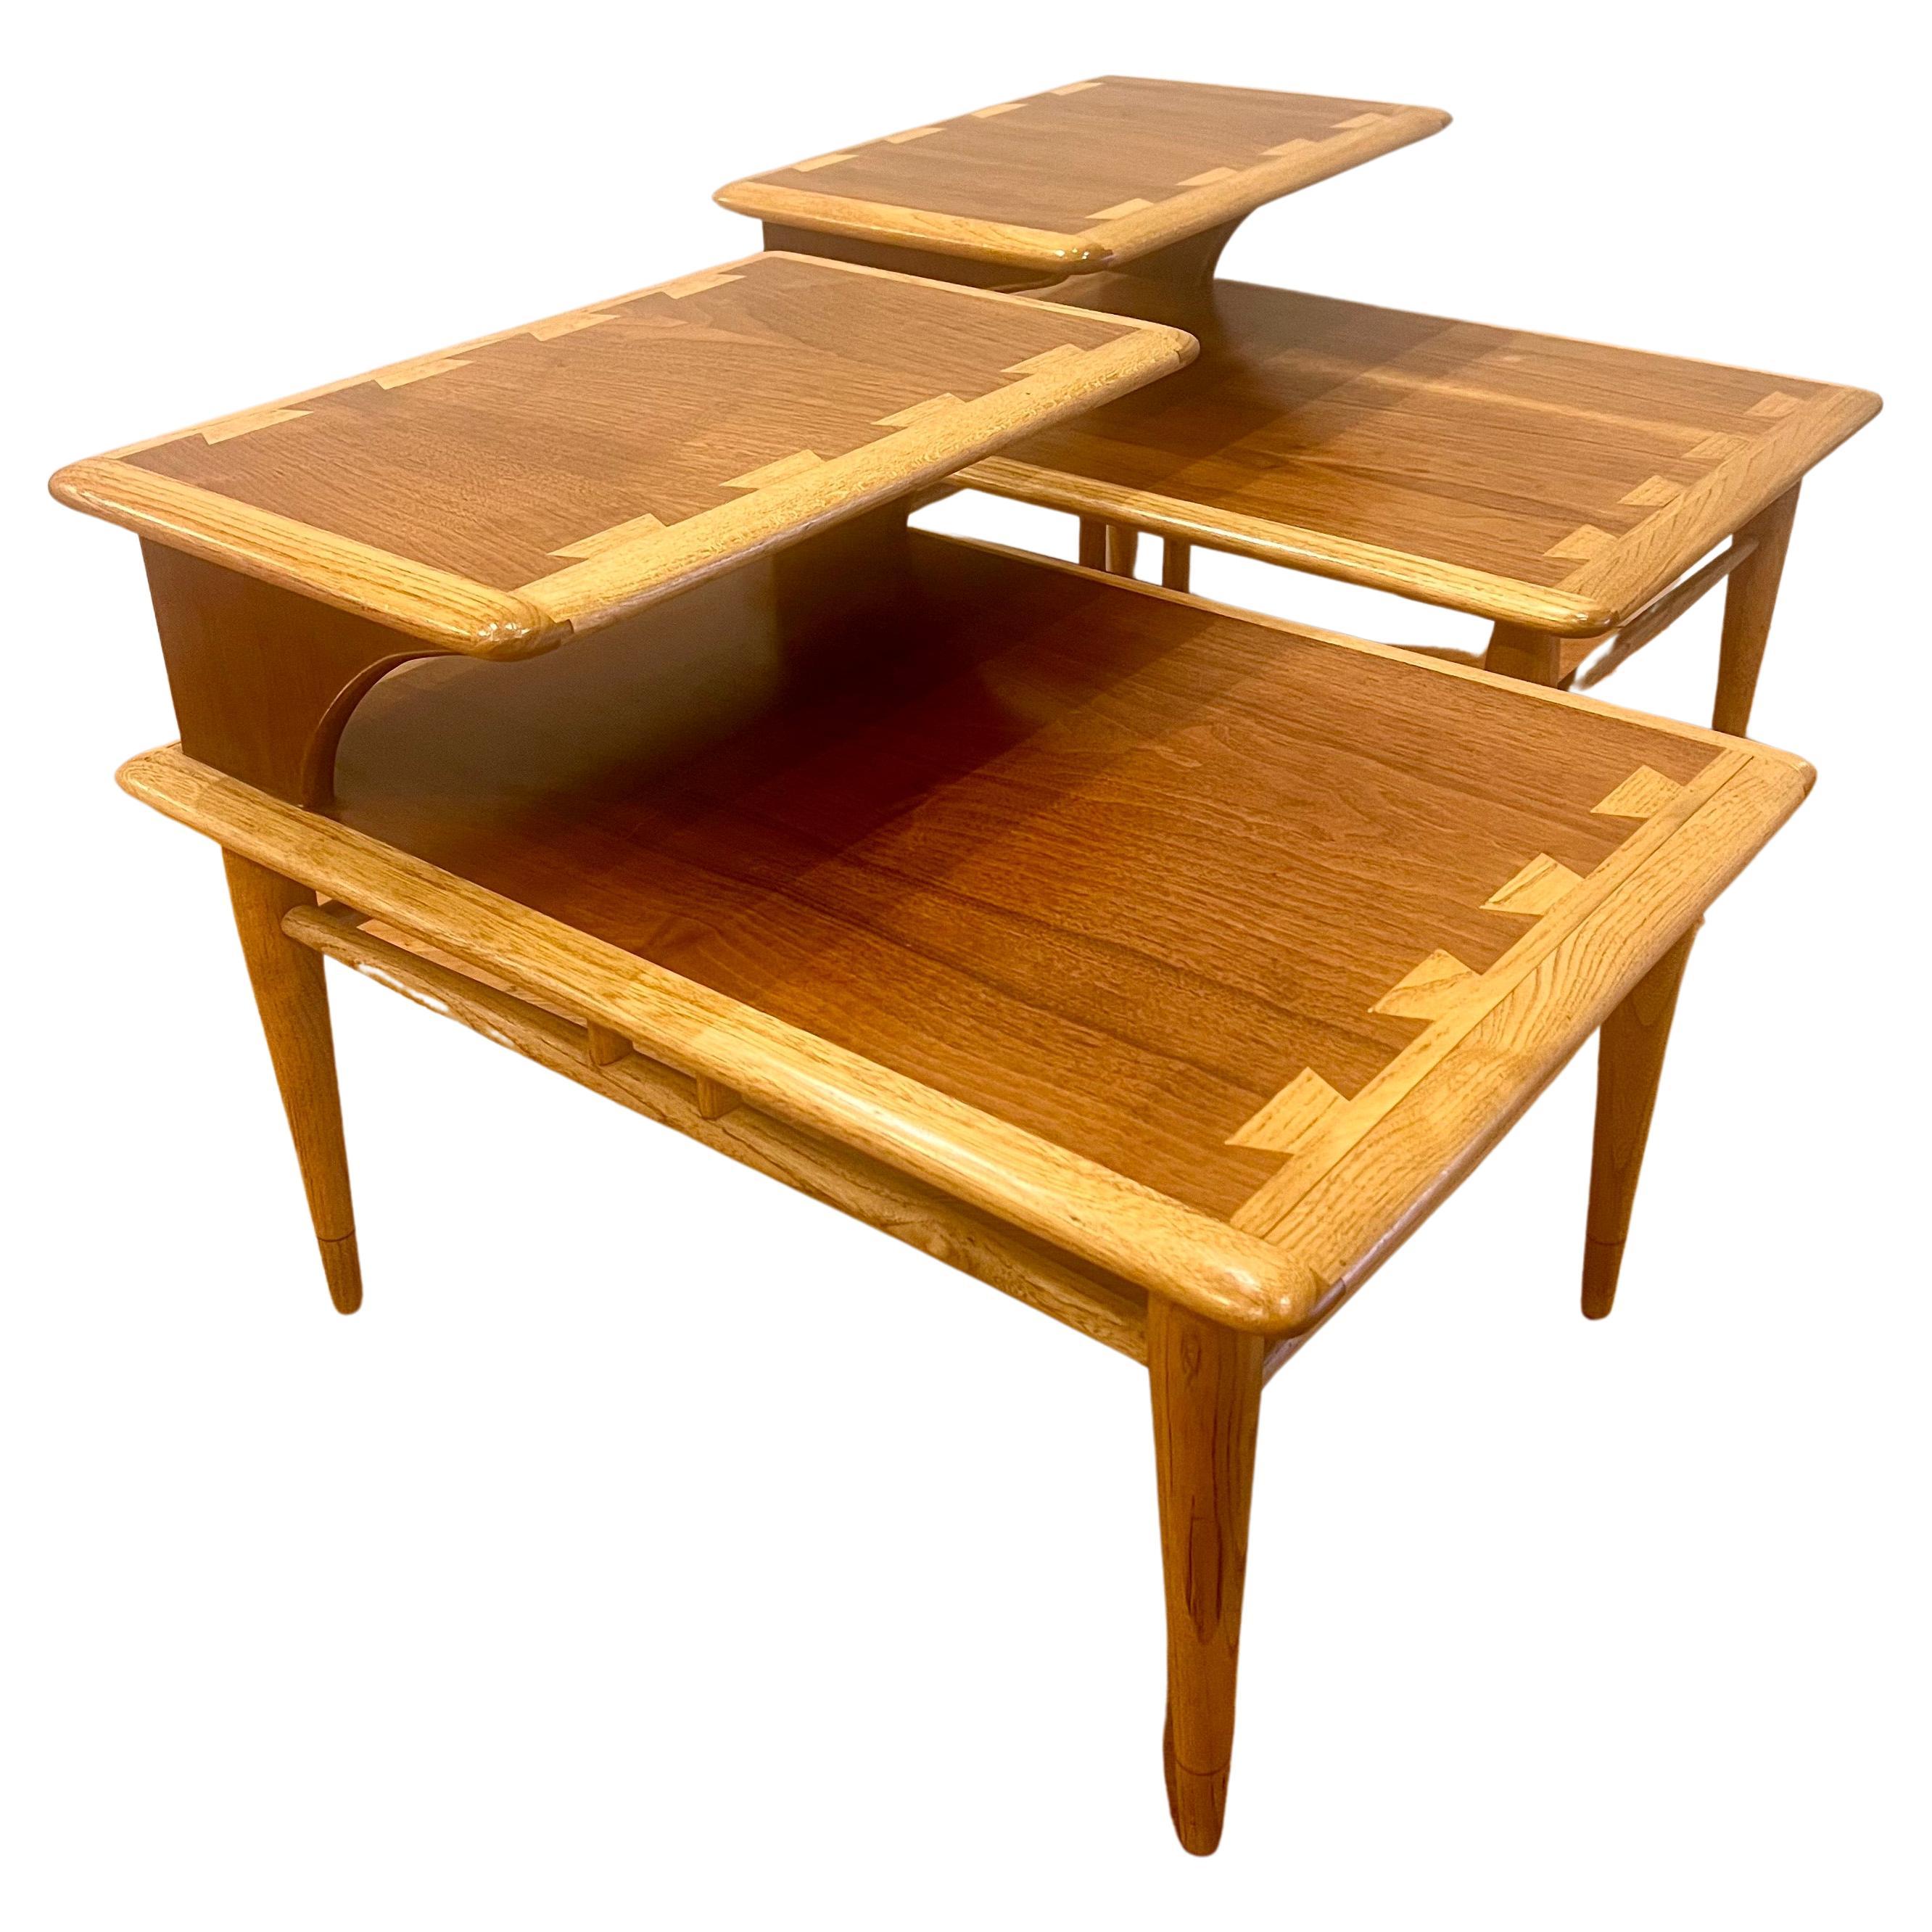 Beautiful craftsmanship on this 1950s, American modern walnut inlaid step end tables, solid tapered legs, and beech wood combination, the tables have been refinished and are in very nice condition. great between 2 club chairs or can be used as a